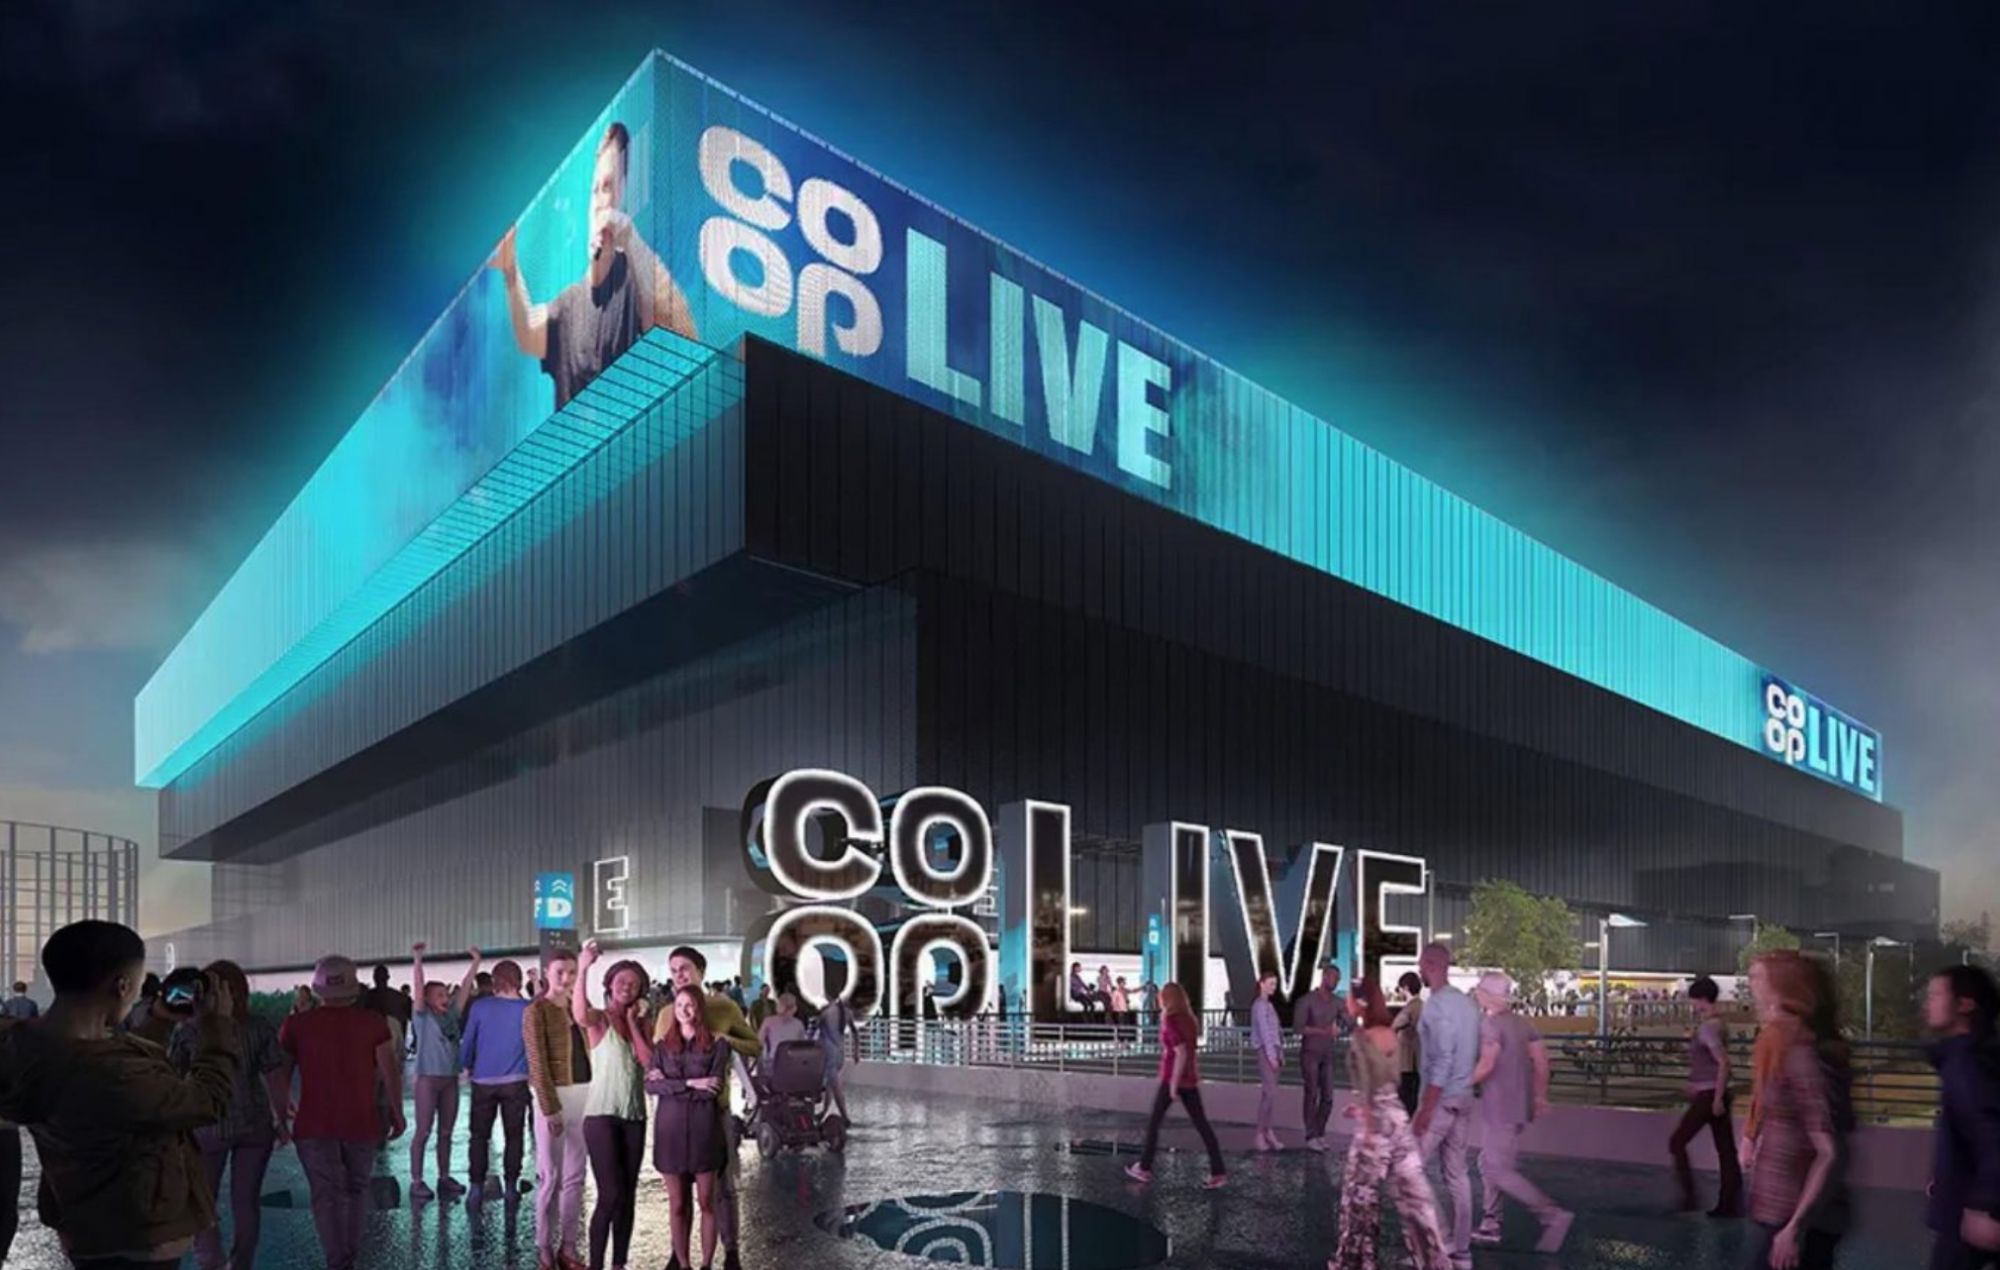 Music Venue Trust say Manchester Co-Op Live Arena is “a great idea” but urge them to “work in a way that secures the future of live music”